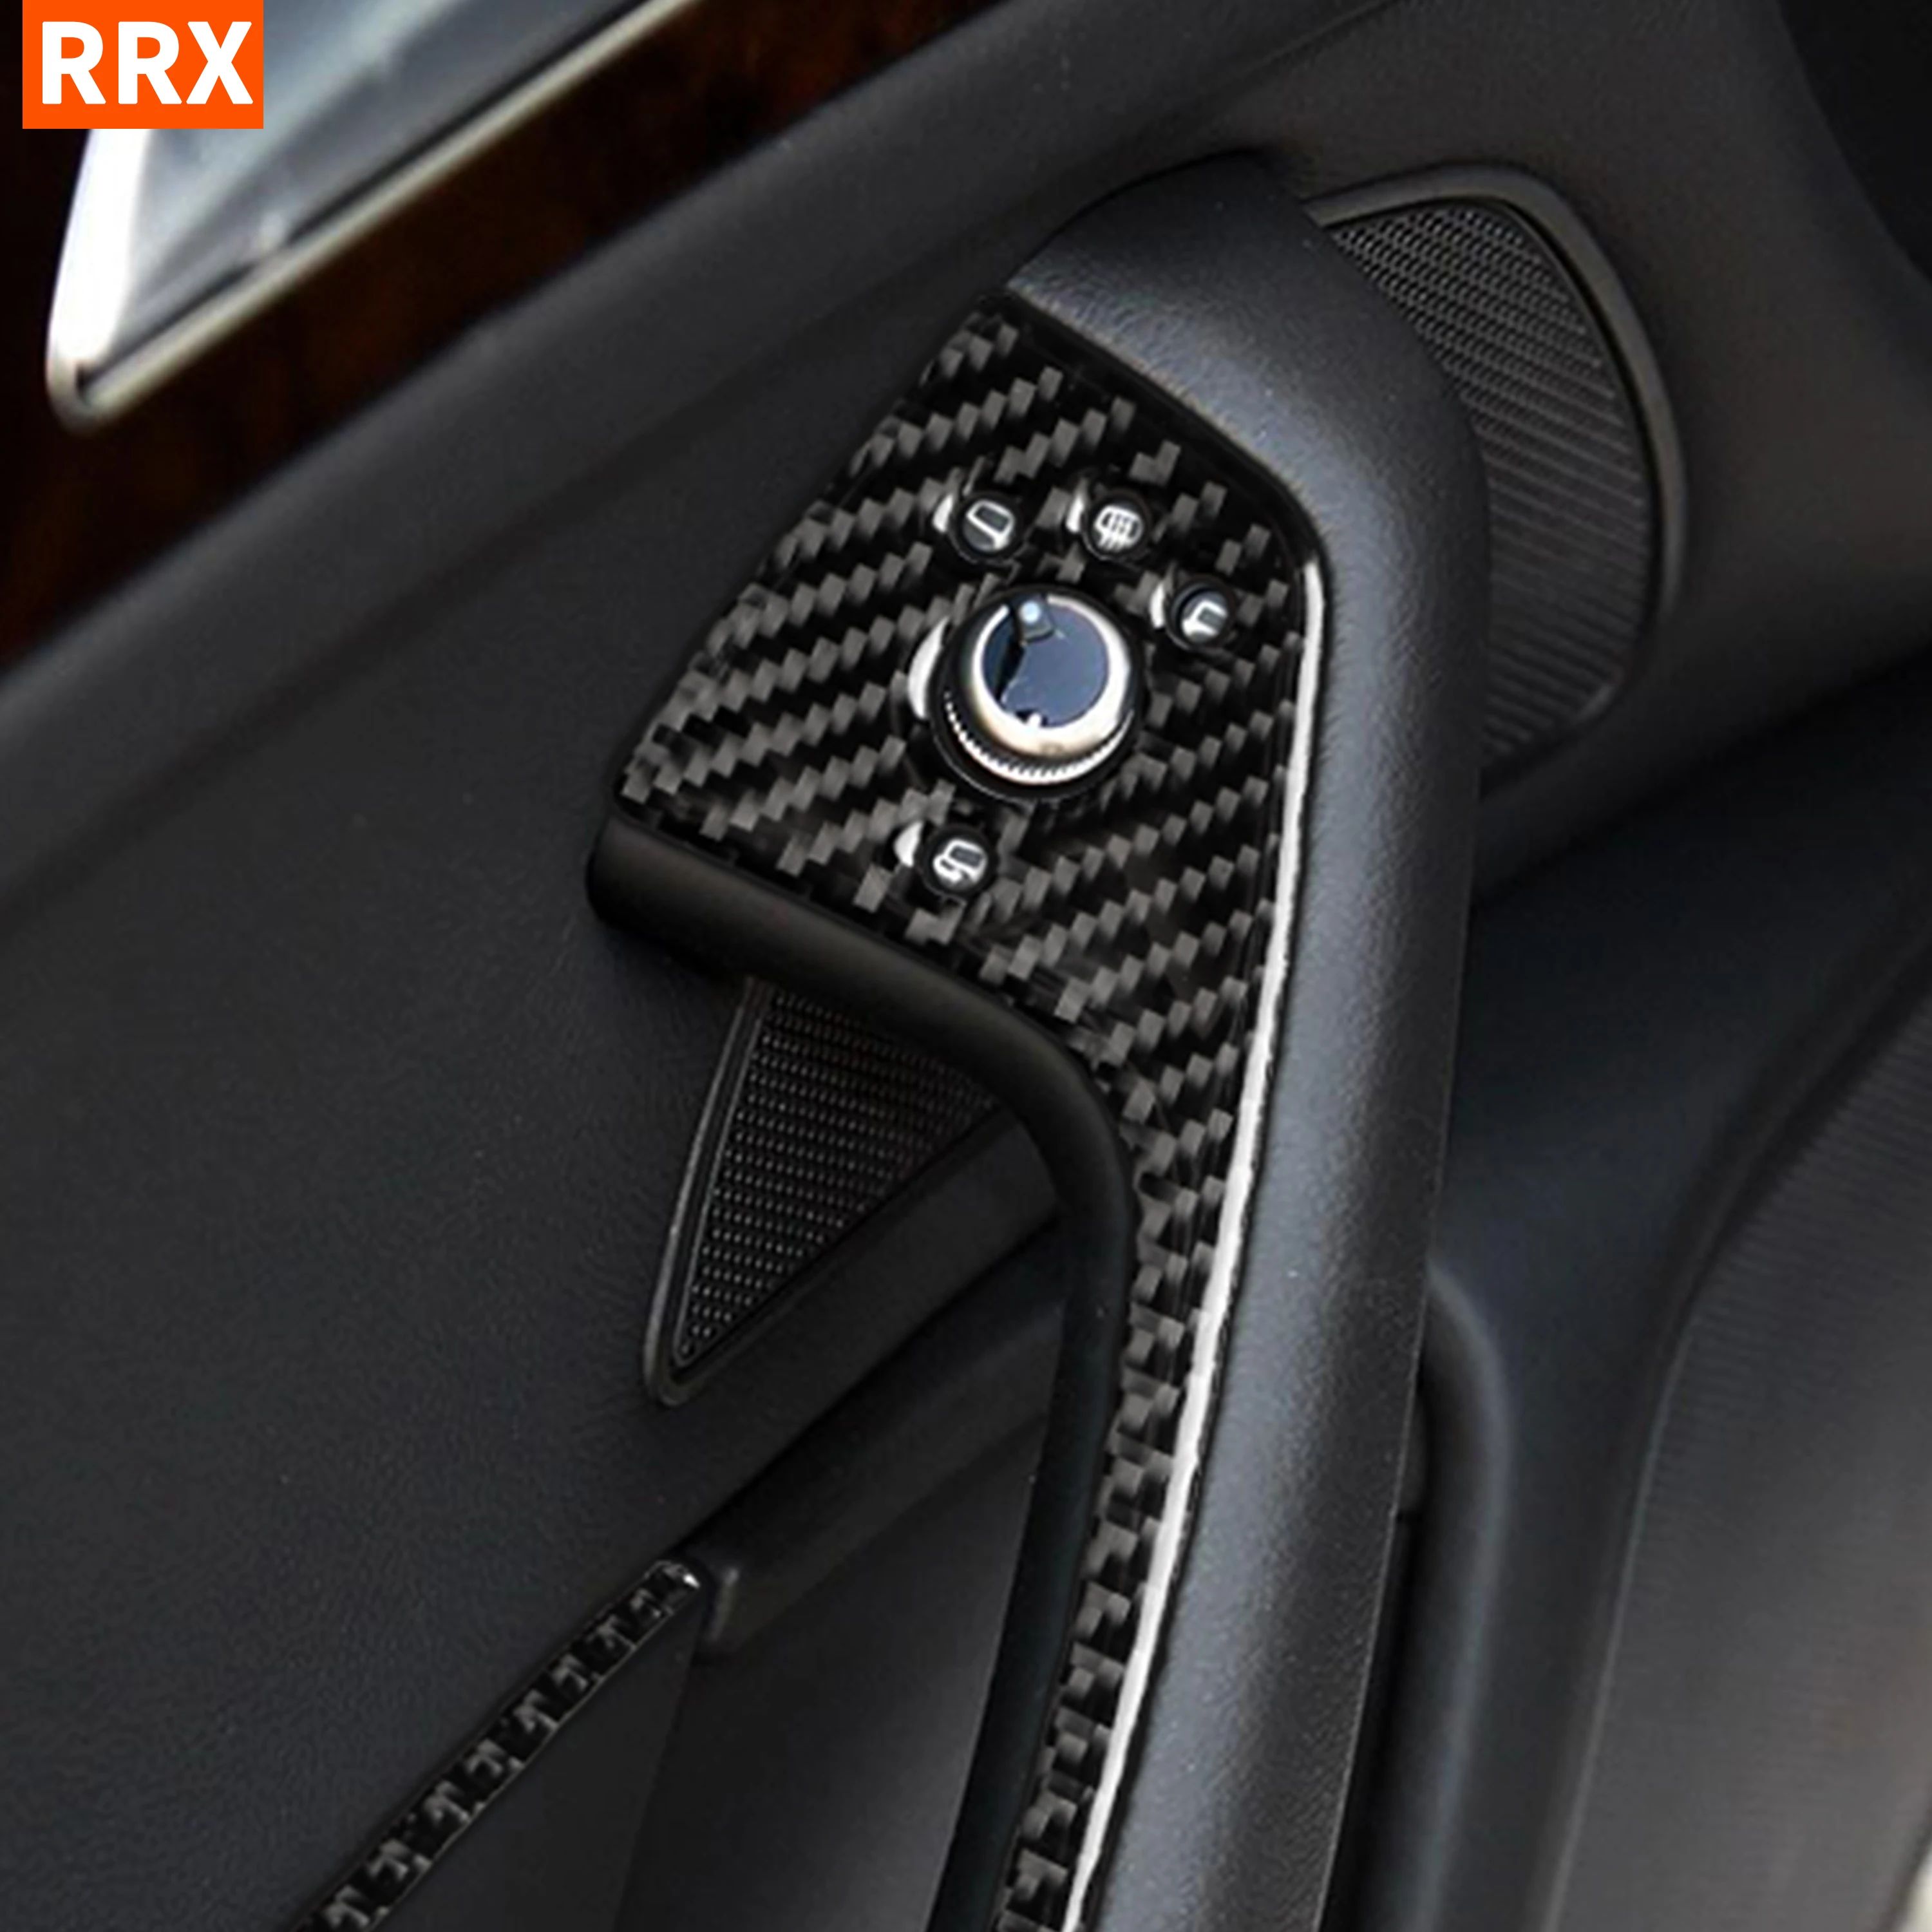 For Audi A6 S6 C7 A7 S7 4g8 2012-2018 Accessories Carbon Fiber Interior  Door Window Switch Control Panel Trim Cover Sticker Interior Mouldings  AliExpress